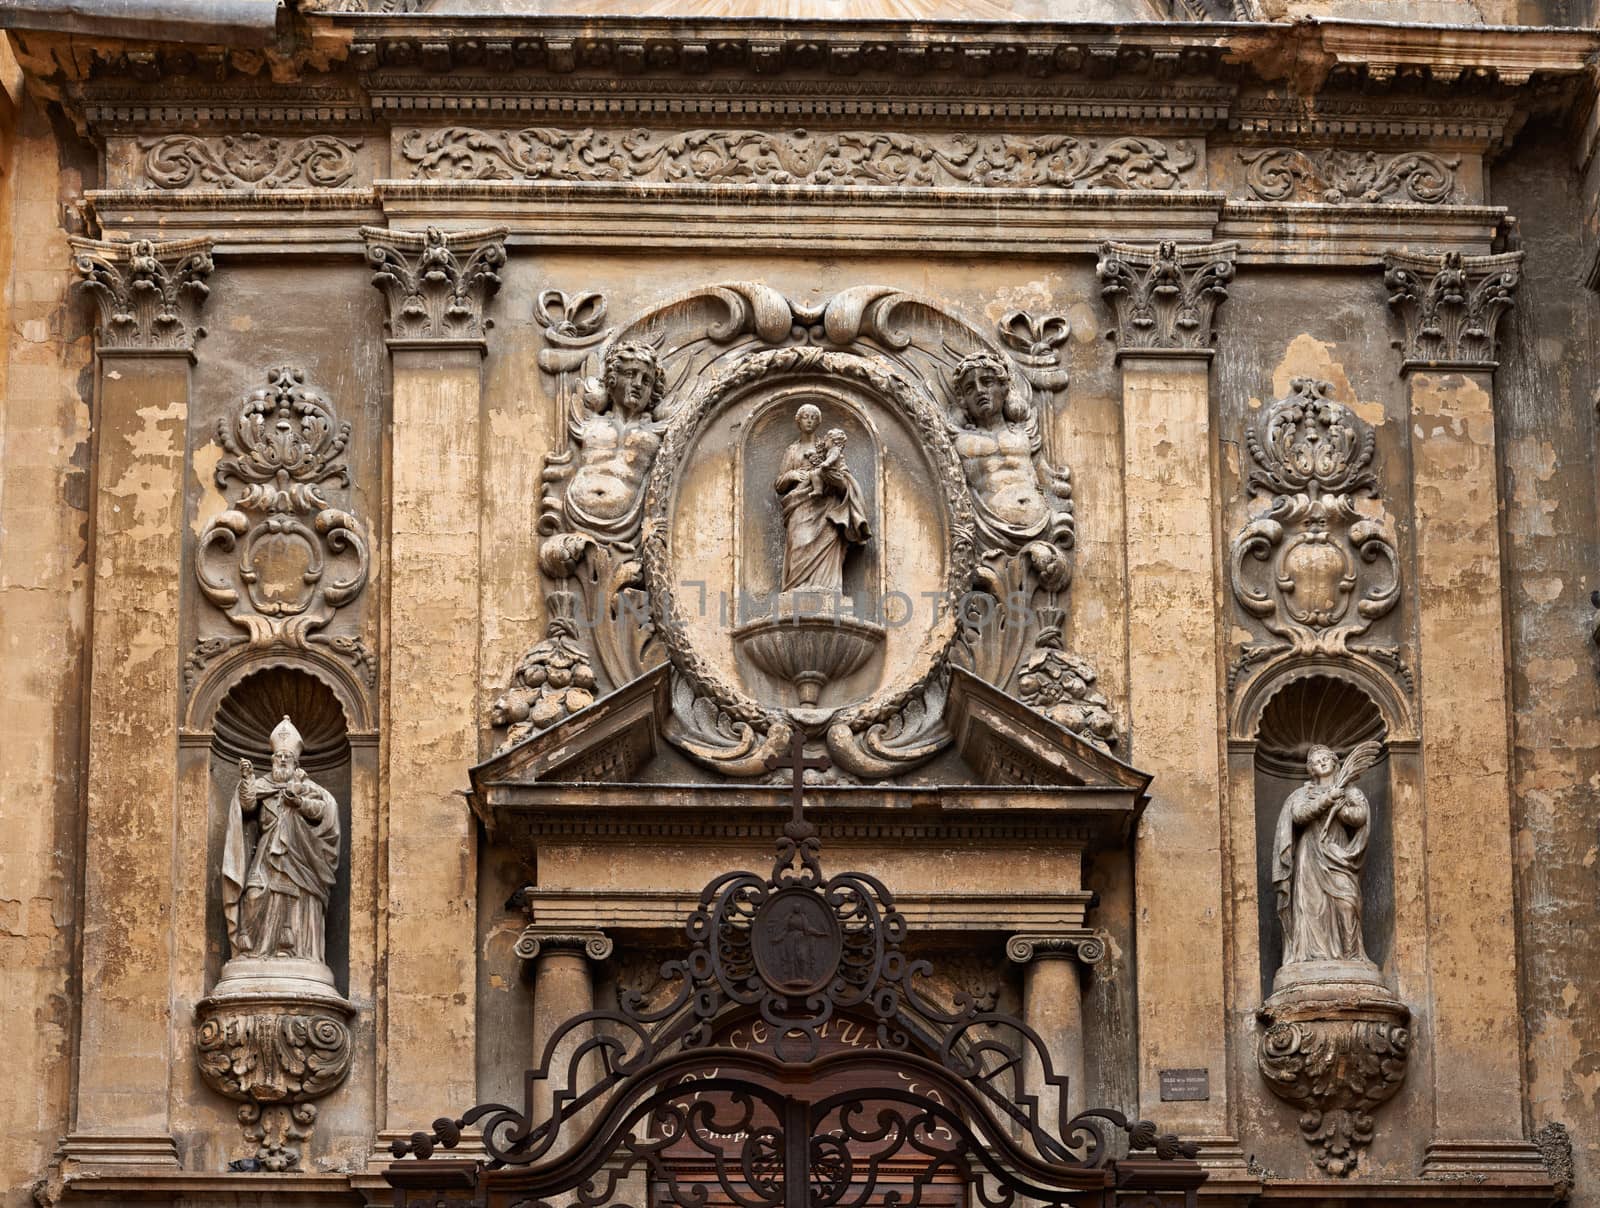 Rich decoration on a cathedral facade by ecobo